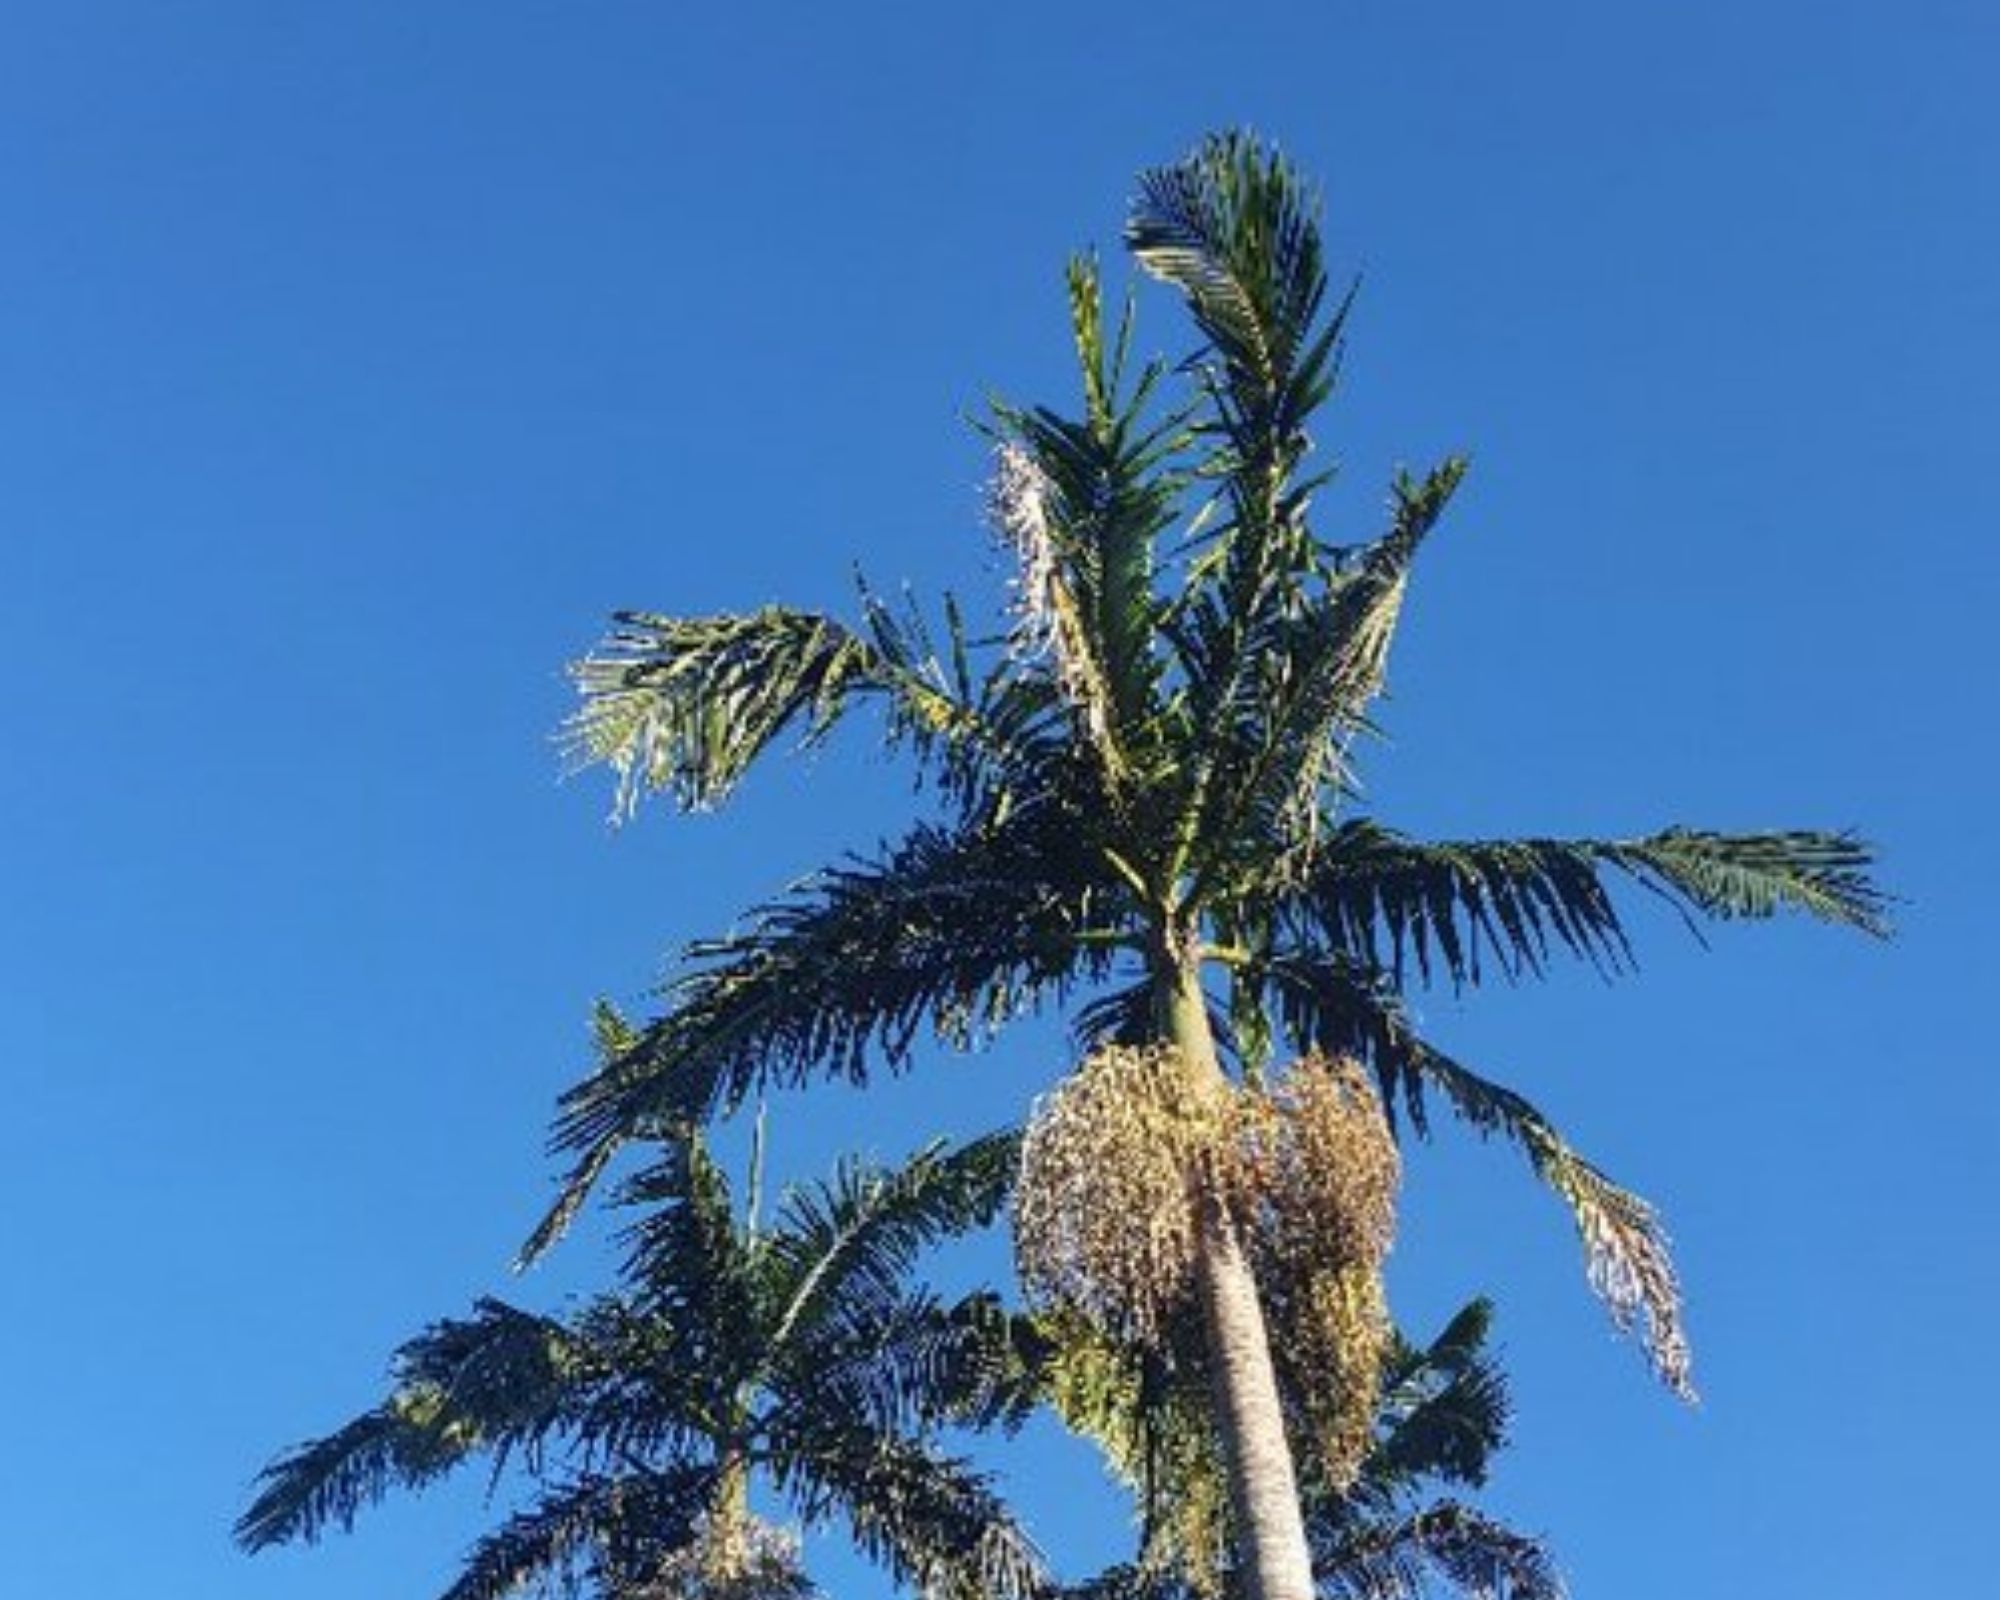 Palm trees against bright blue sky